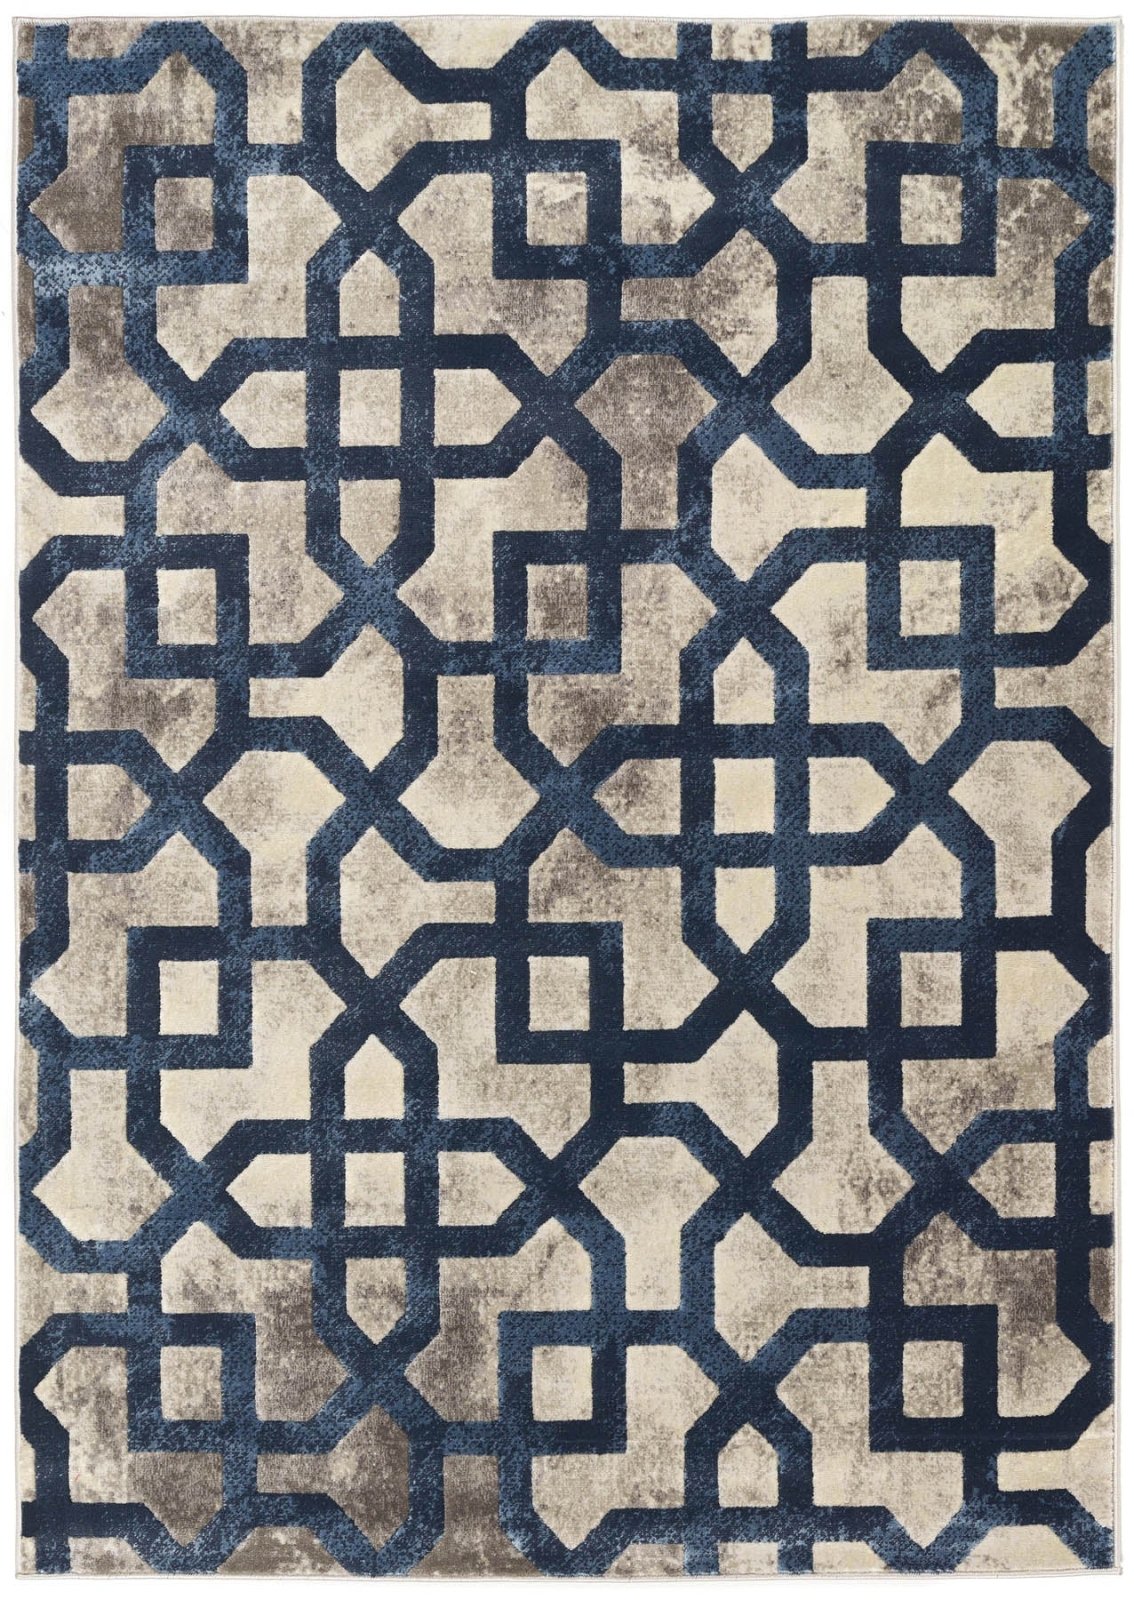 Blue and Grey Rugs